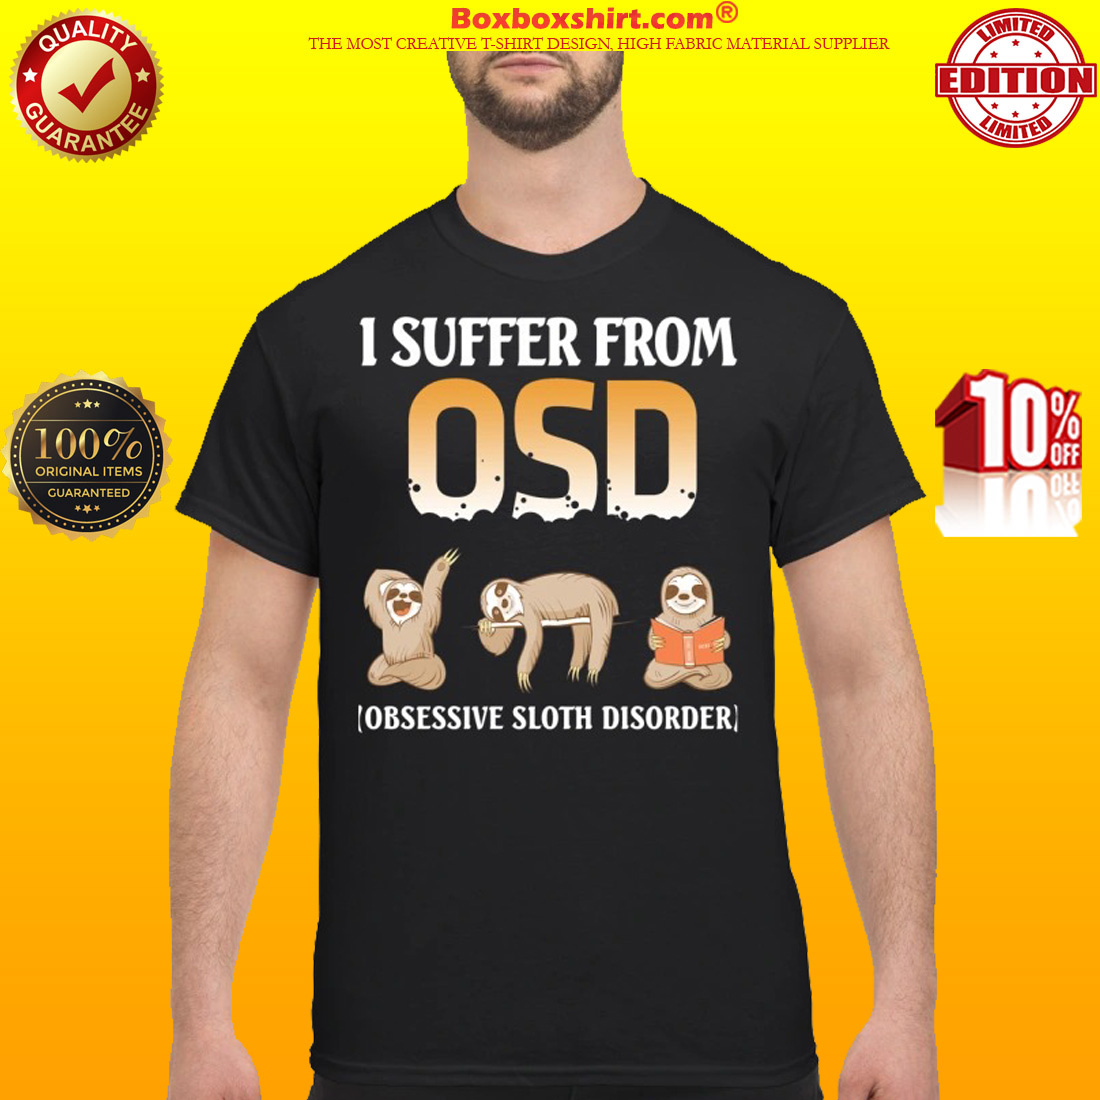 I suffer from OSD obsessive sloth disorder classic shirt